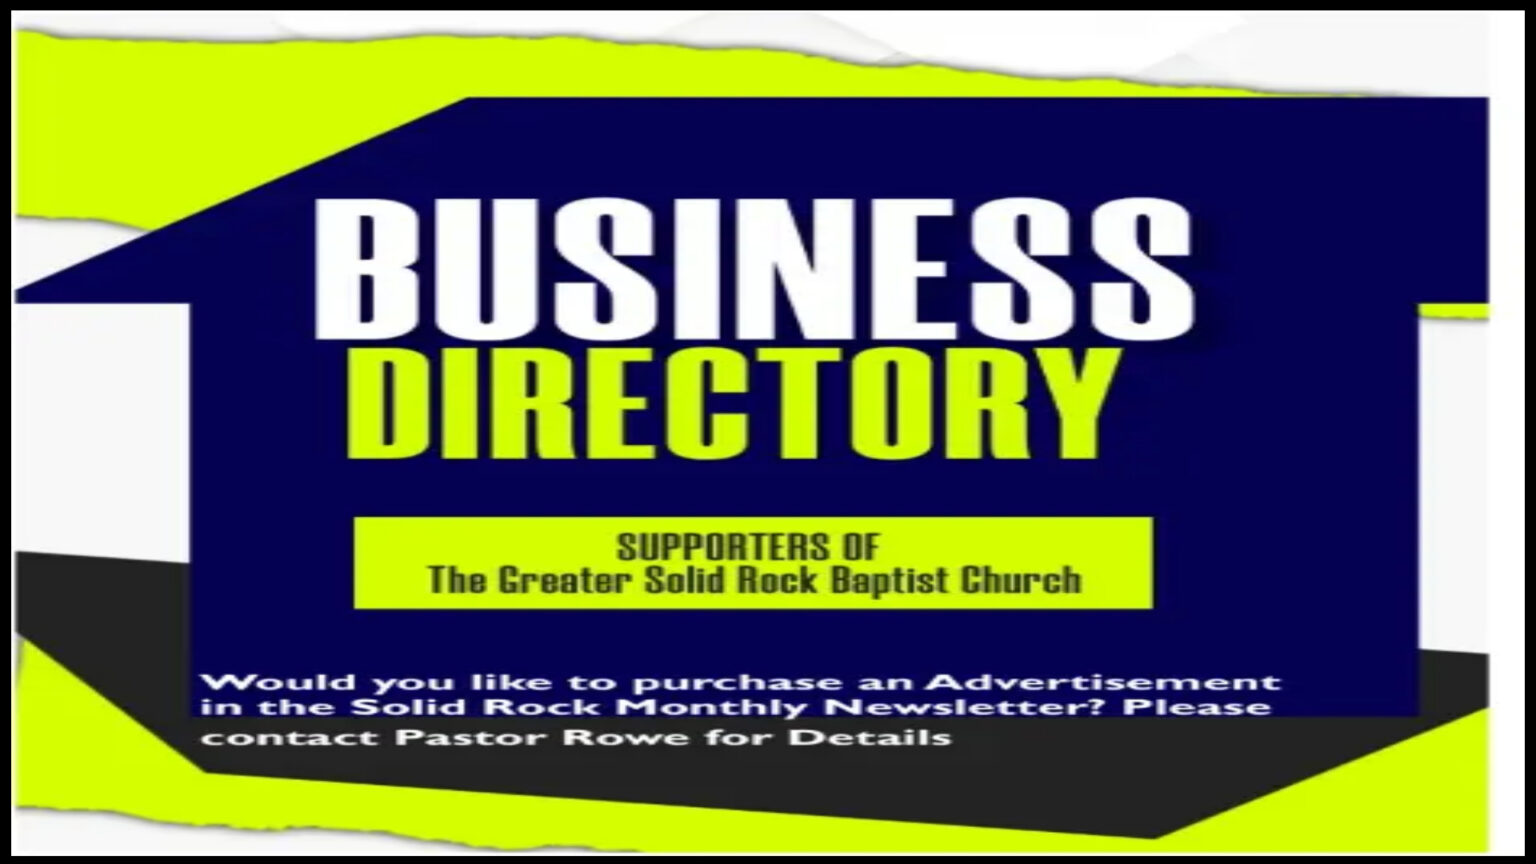 March 24 Business Directory - Made with PosterMyWall